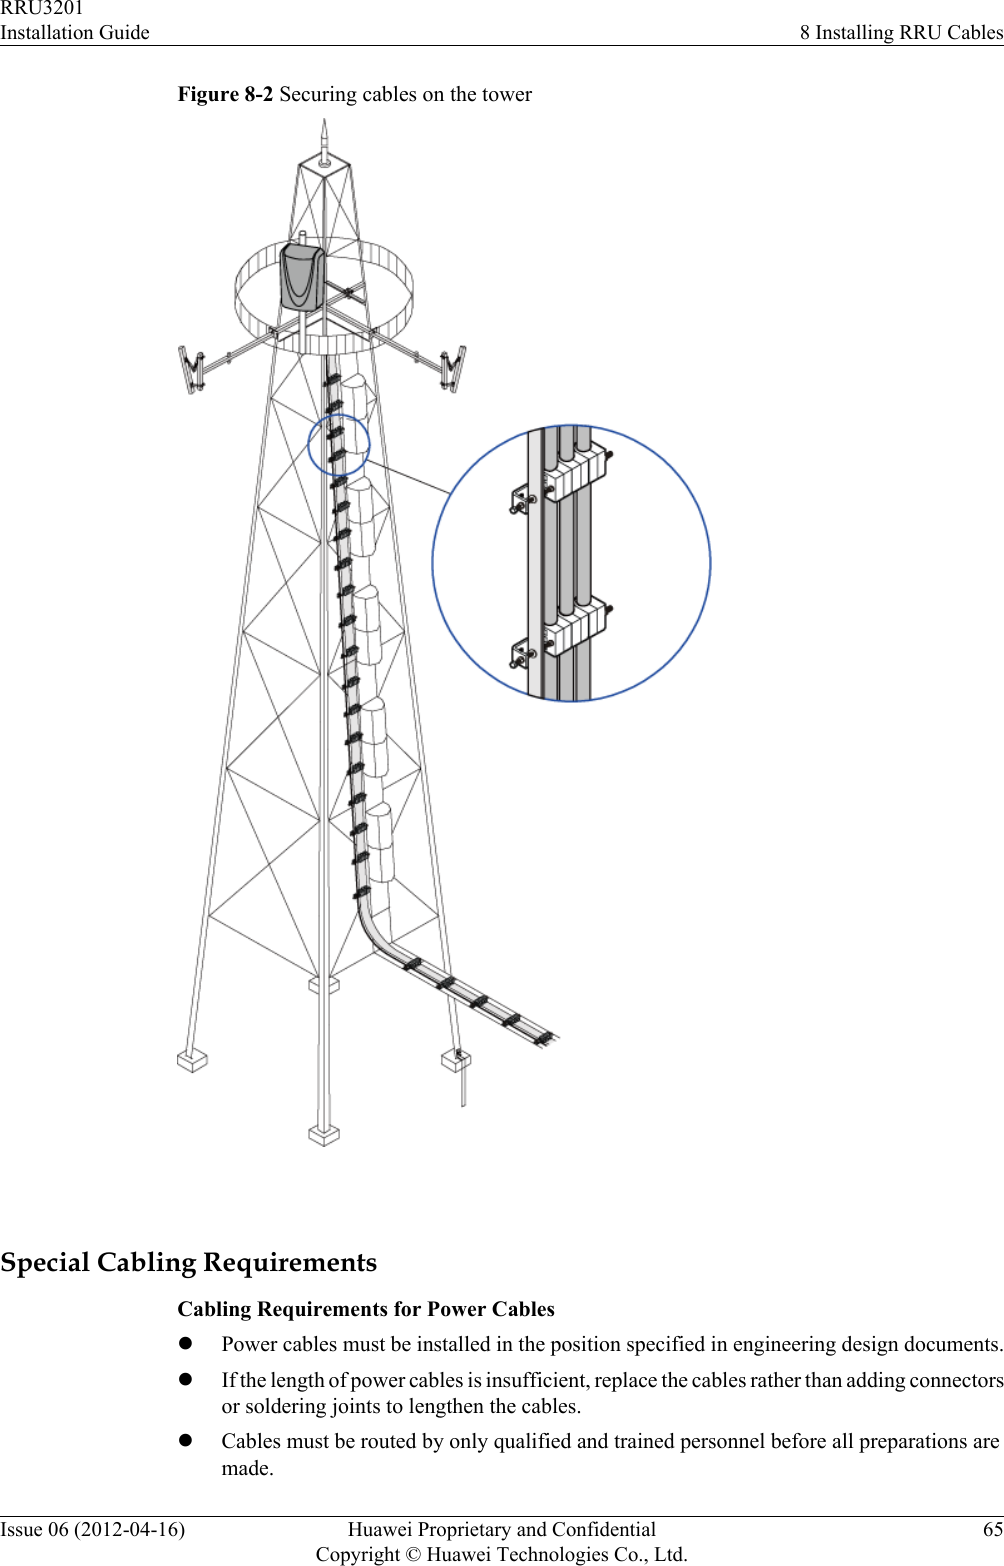 Figure 8-2 Securing cables on the tower Special Cabling RequirementsCabling Requirements for Power CableslPower cables must be installed in the position specified in engineering design documents.lIf the length of power cables is insufficient, replace the cables rather than adding connectorsor soldering joints to lengthen the cables.lCables must be routed by only qualified and trained personnel before all preparations aremade.RRU3201Installation Guide 8 Installing RRU CablesIssue 06 (2012-04-16) Huawei Proprietary and ConfidentialCopyright © Huawei Technologies Co., Ltd.65